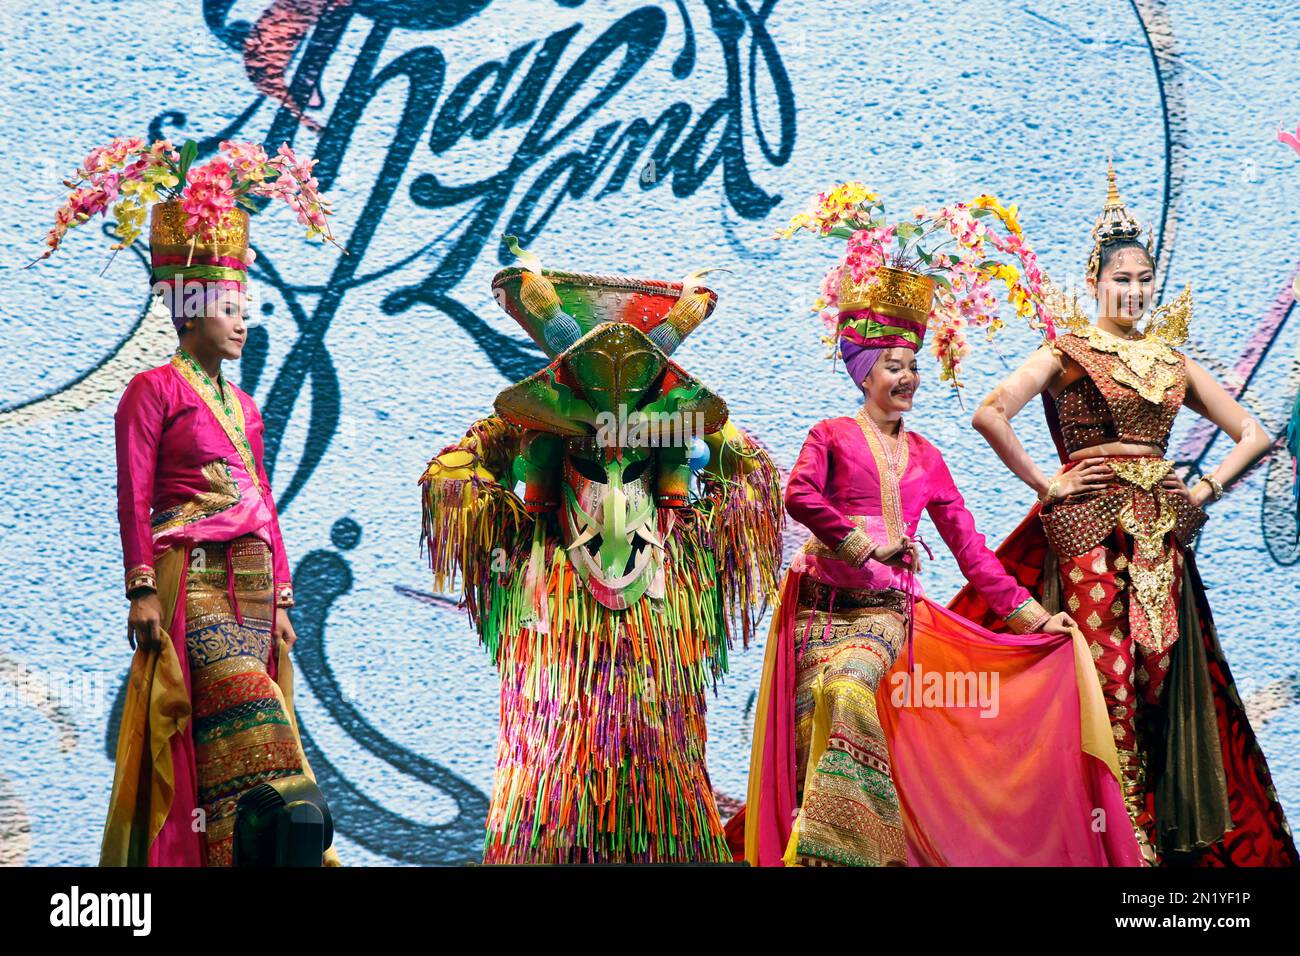 Dubai, United Arab Emirates - March 15, 2022 thai traditional dancers with colorful authentic costume in a stage Stock Photo